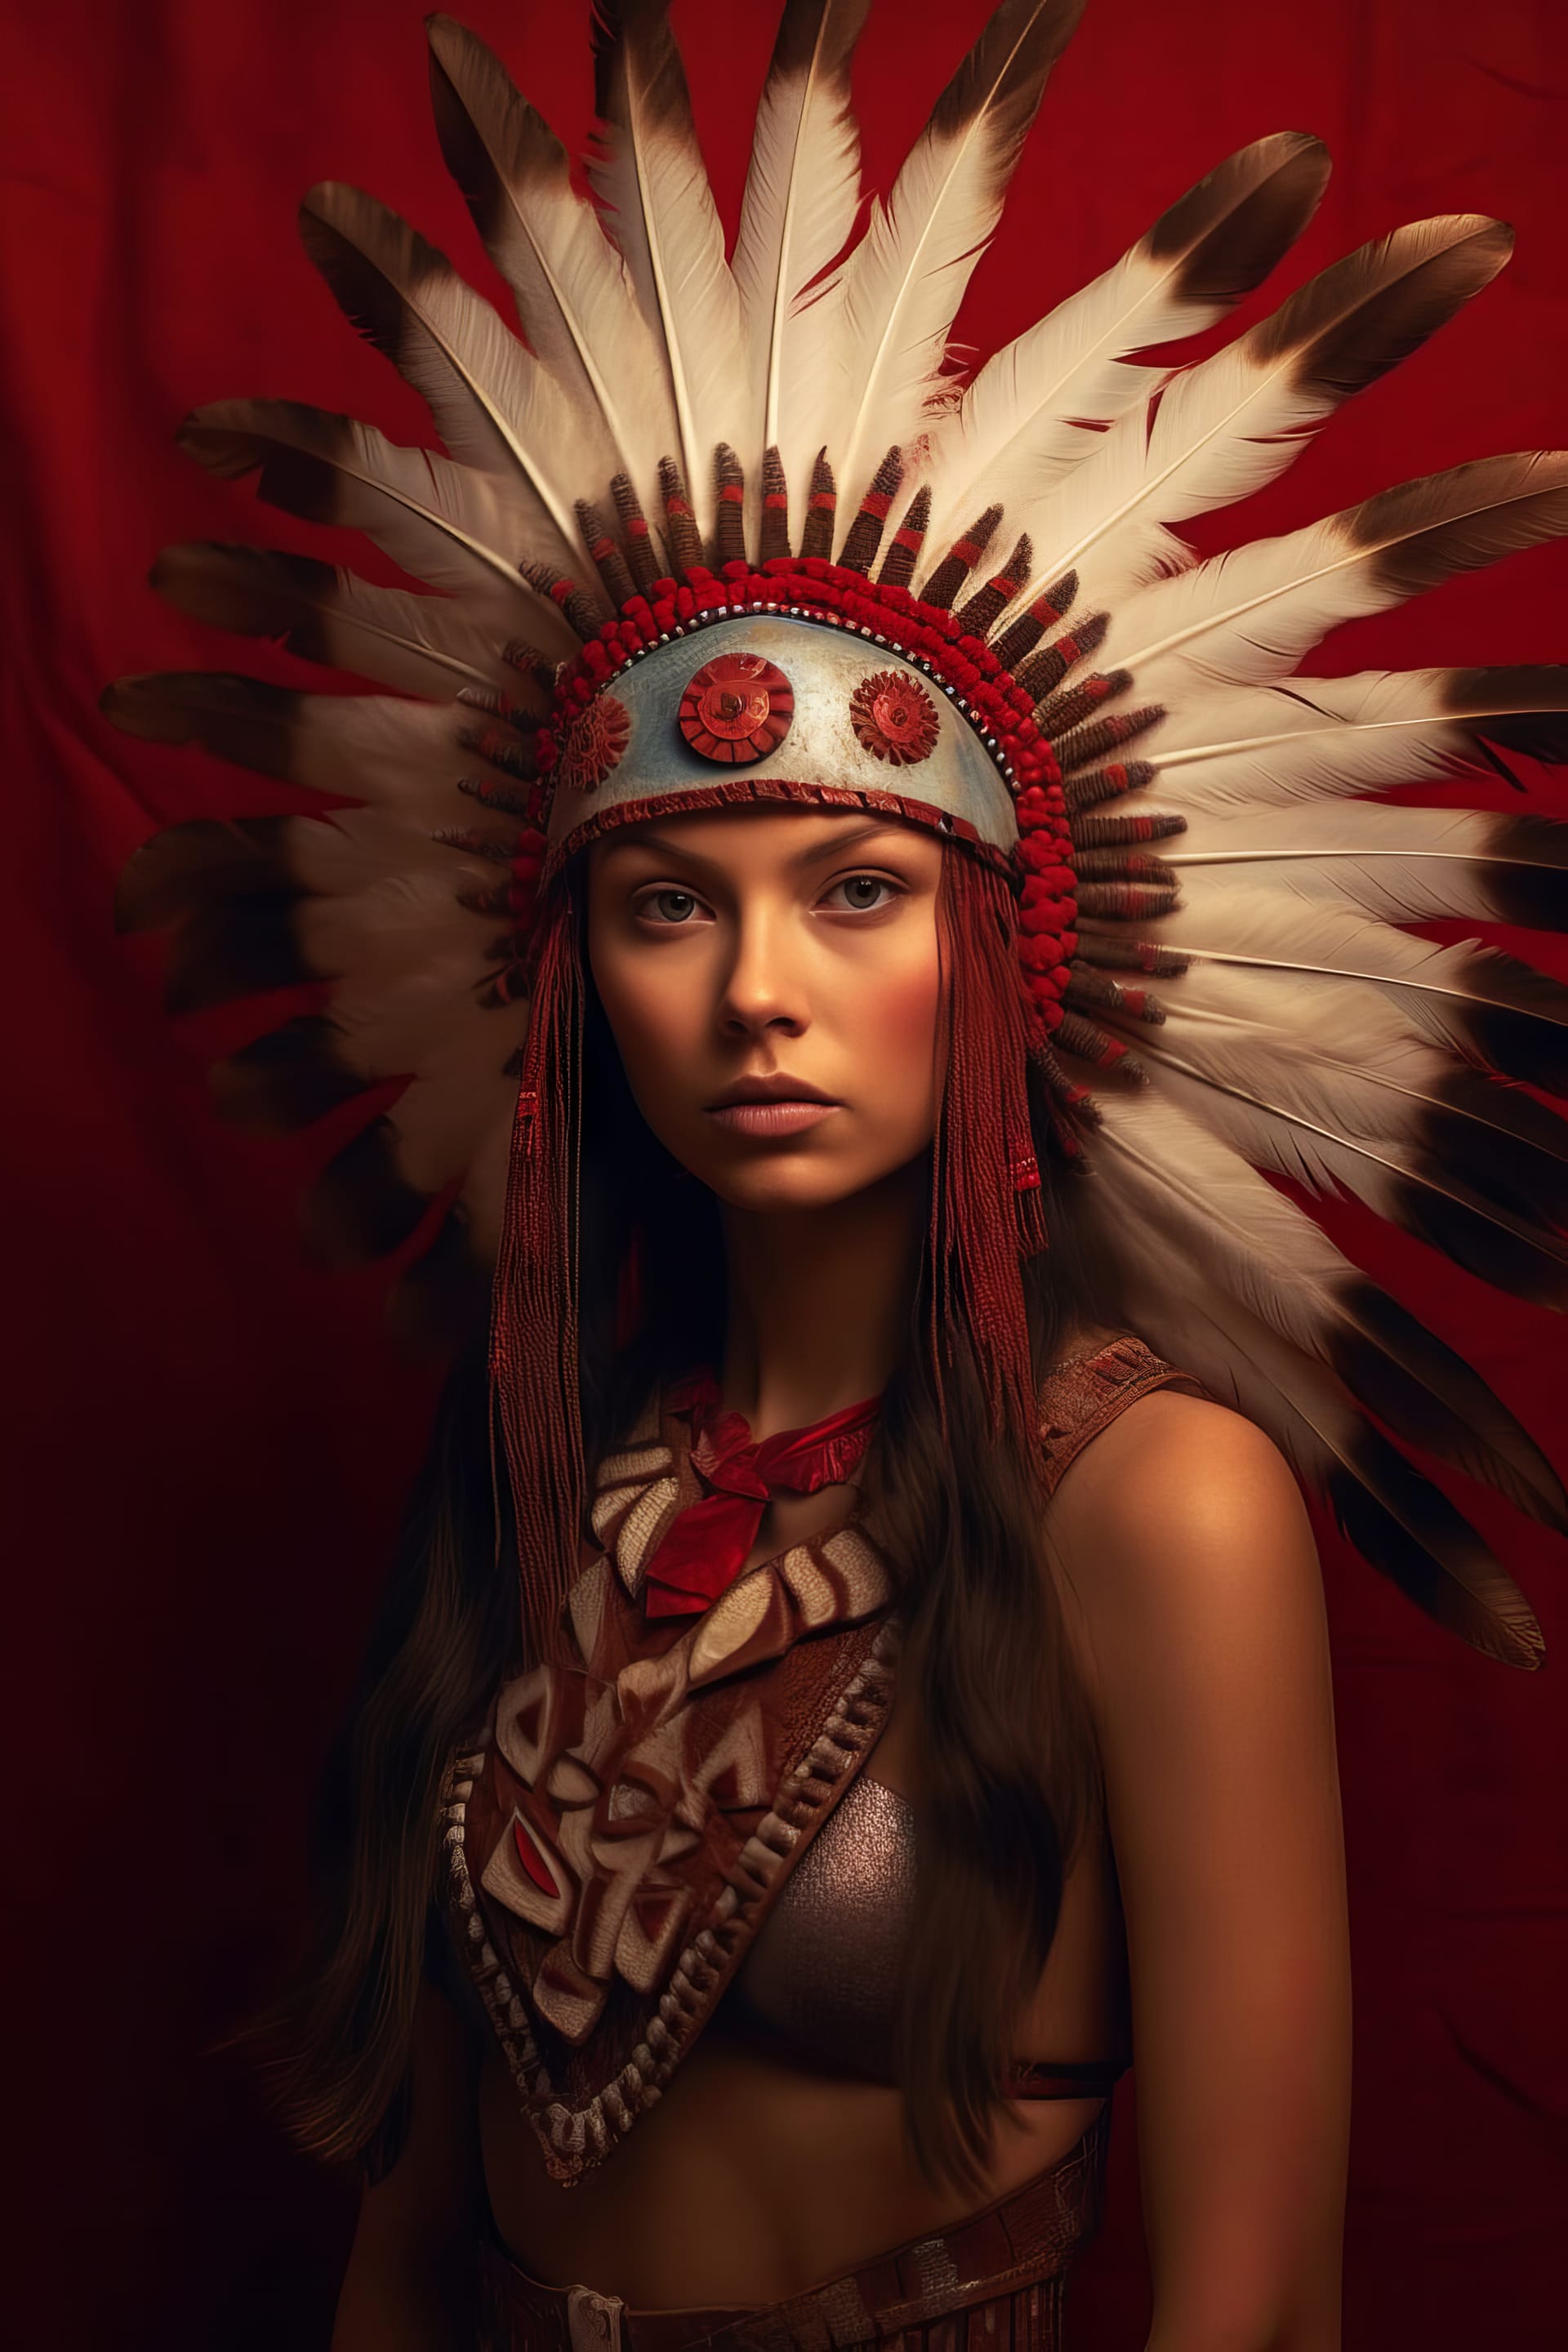 Woman native american costume stands front red background